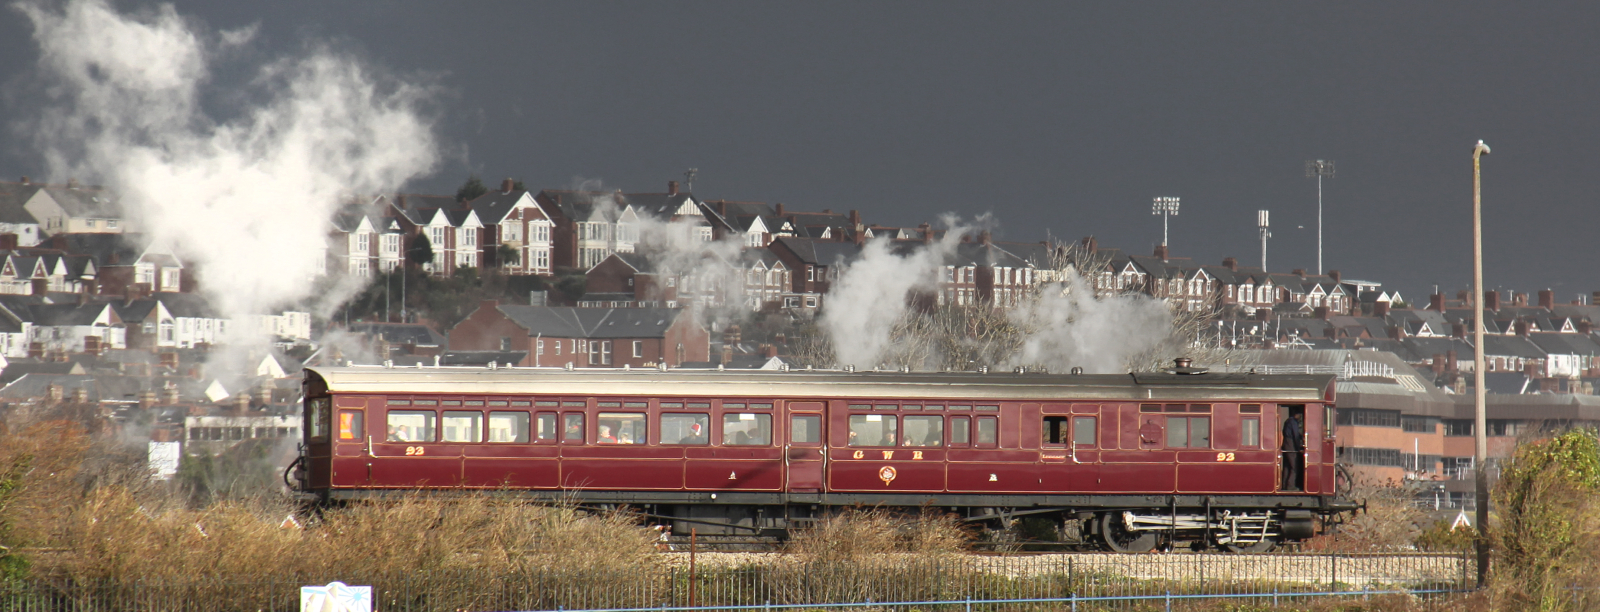 No. 93 in December 2013 on the Barry Tourist Railway, Wales